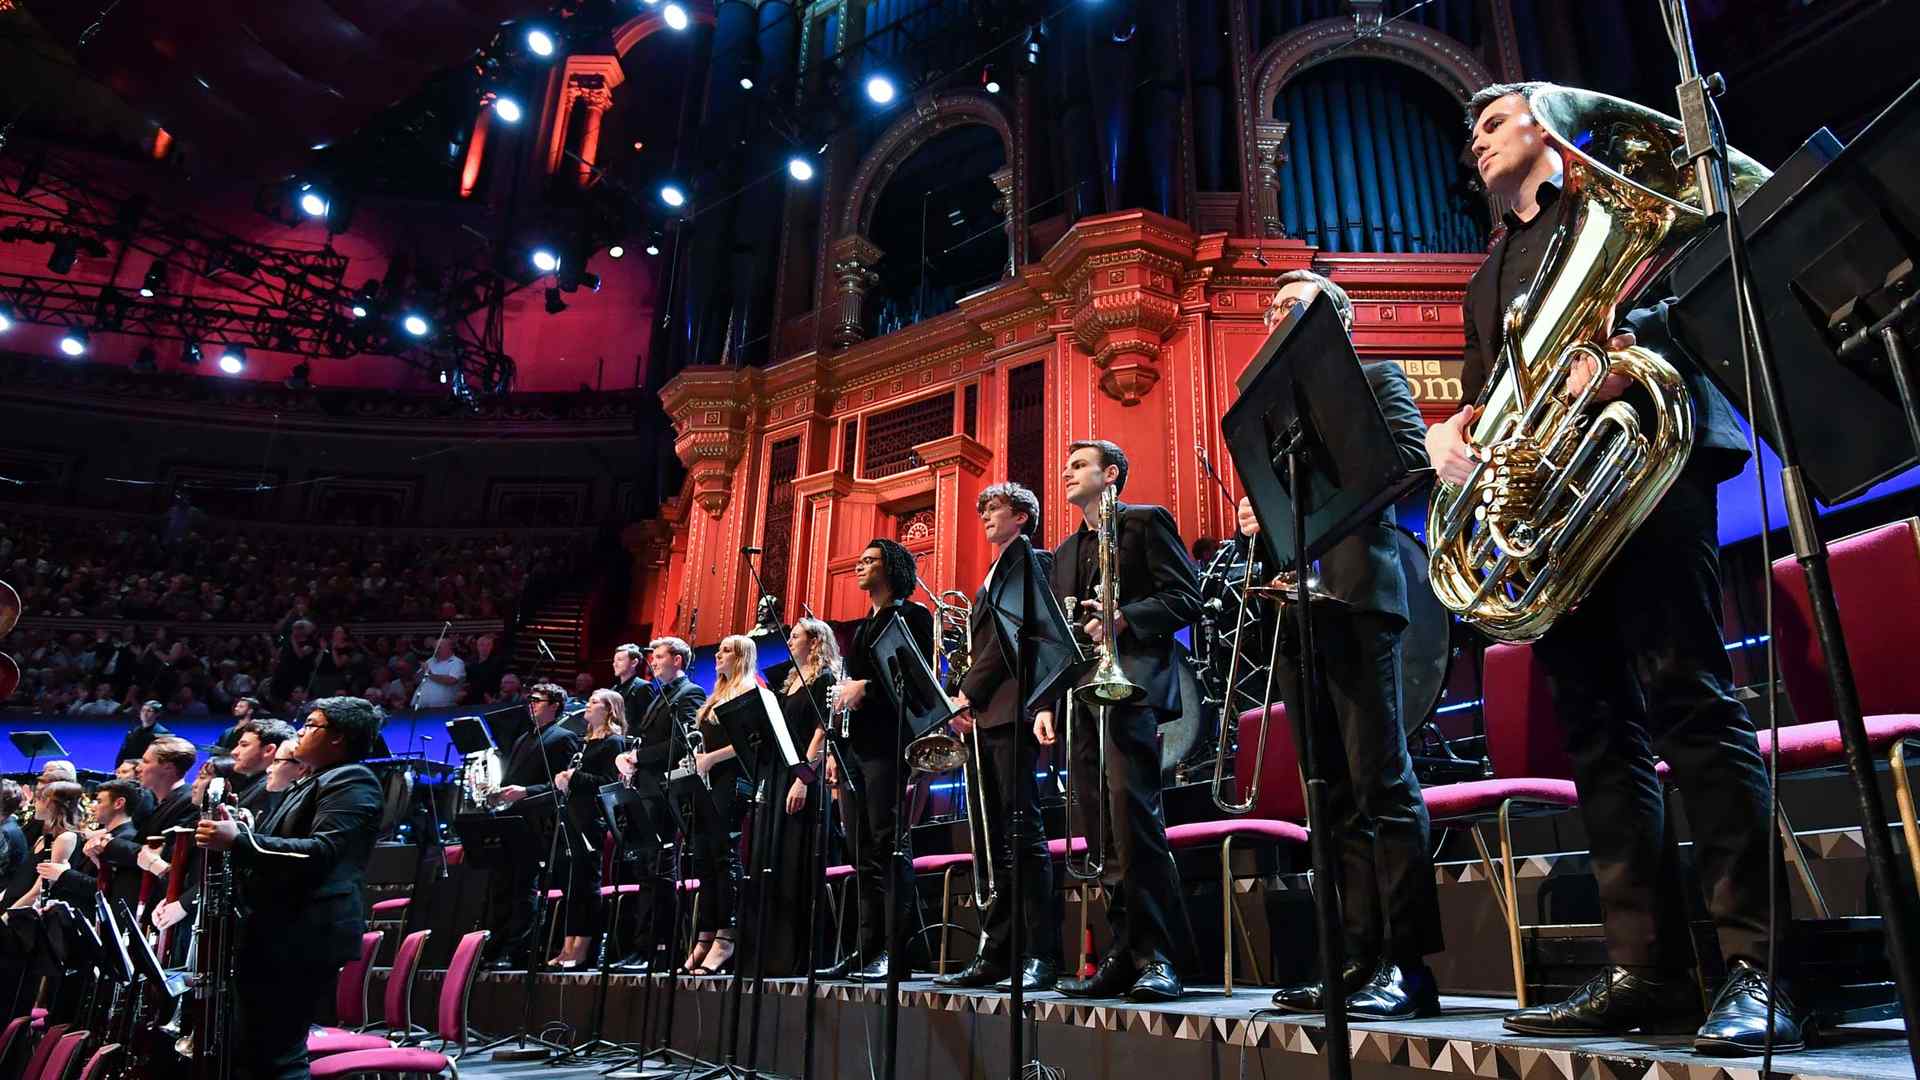 A row of Juilliard Orchestra musicians, including a tuba player, stand as they receive an ovation following a performance at the BBC Proms in the dramatically lit Royal Albert Hall